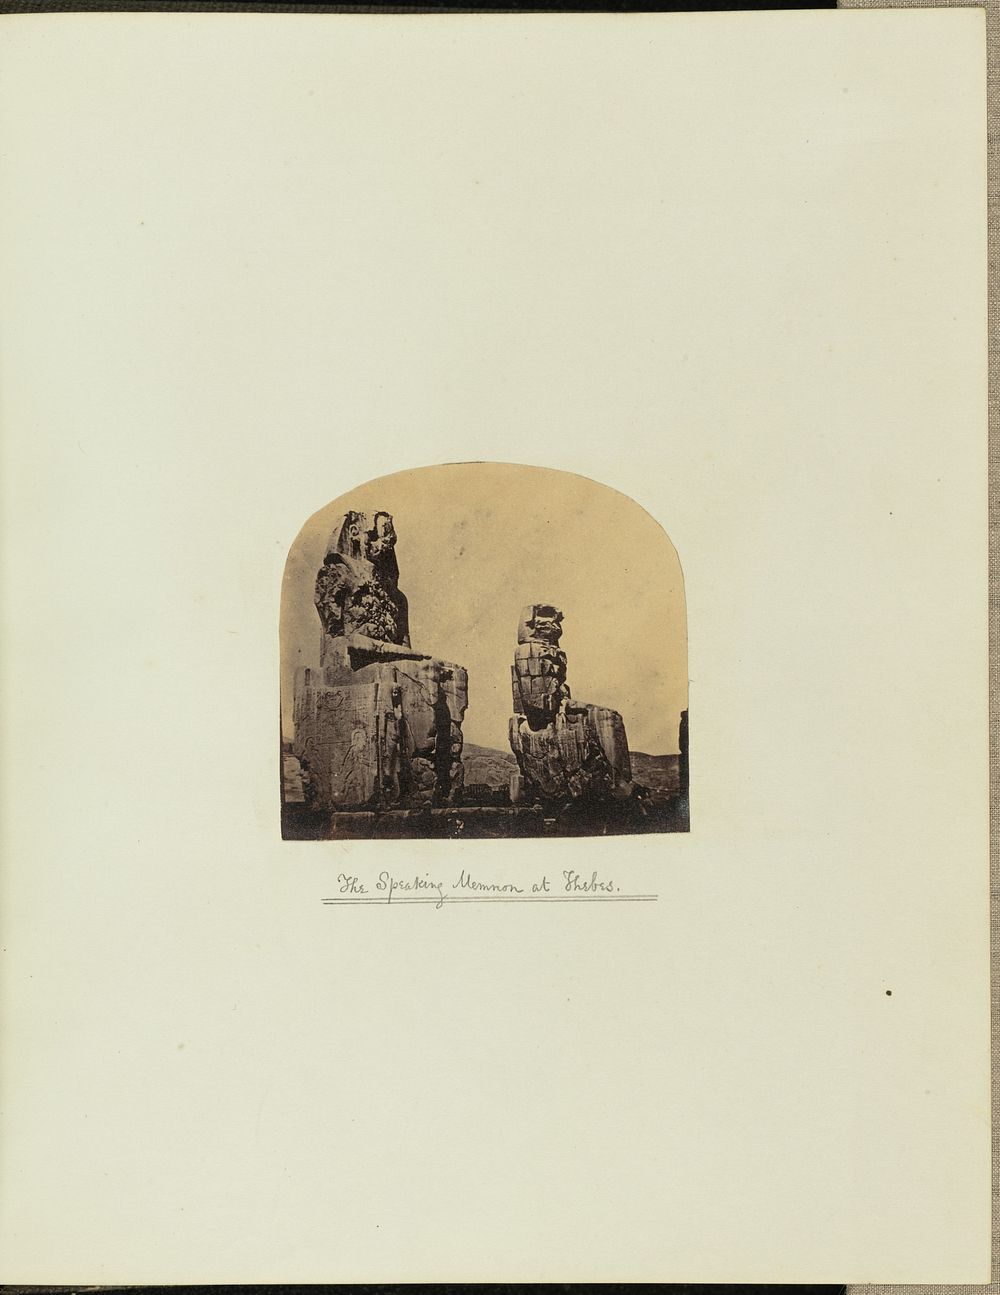 The Speaking Memnon at Thebes by Francis Frith